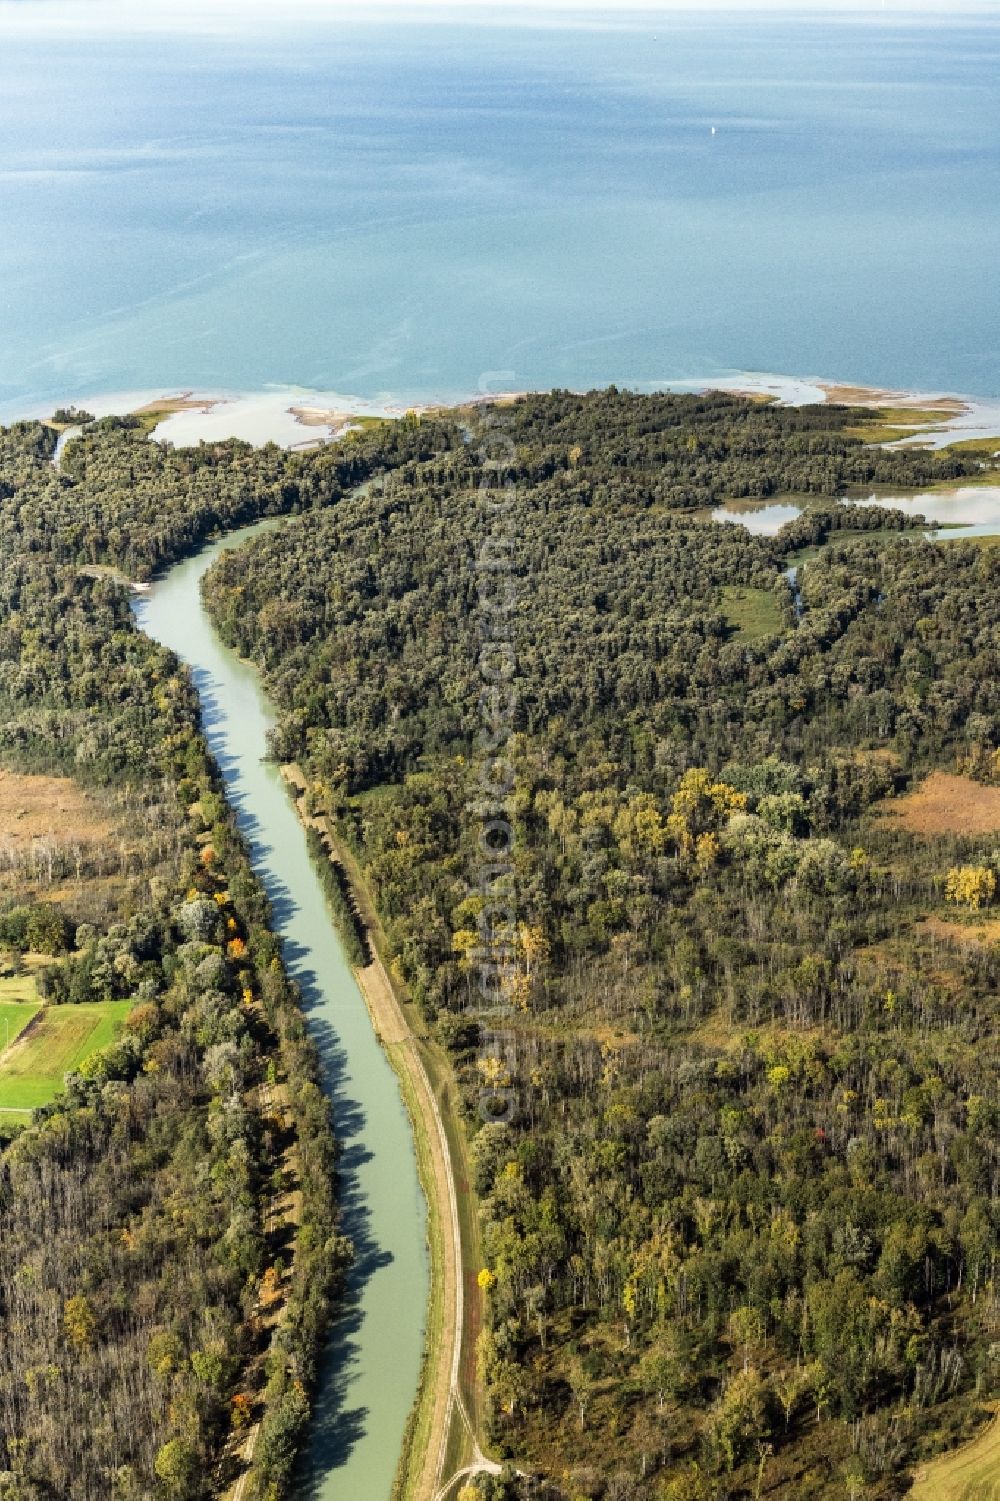 Aerial image Chiemsee - Estuary of the Tiroler Ache in Uebersee in Bavaria. It rises at the Thurn Pass and flows into the Chiemseeat Grabenstaett